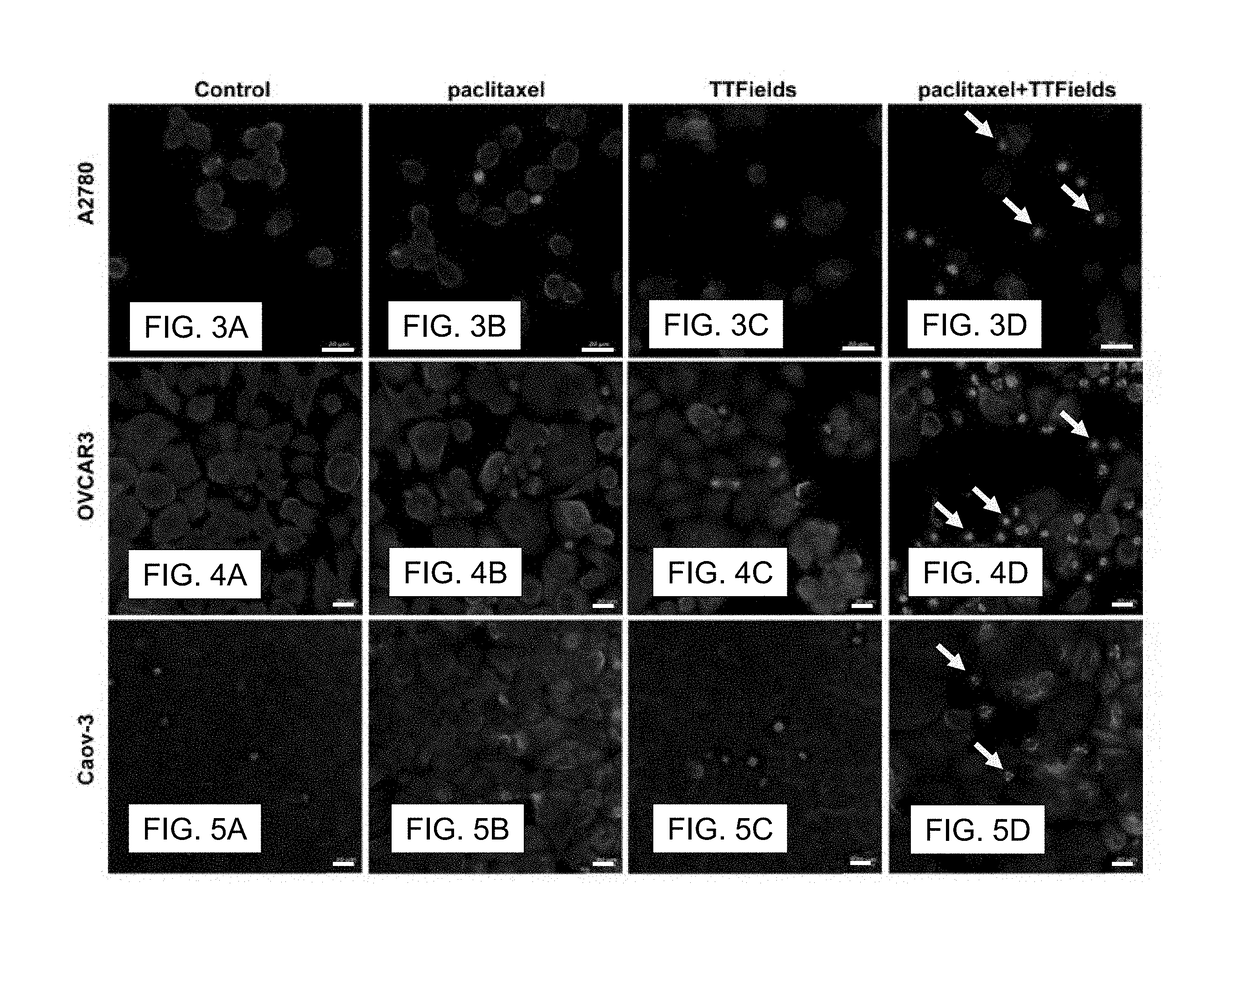 Synchronizing Tumor Cells to the G2/M Phase Using TTFields Combined with Taxane or Other Anti-Microtubule Agents